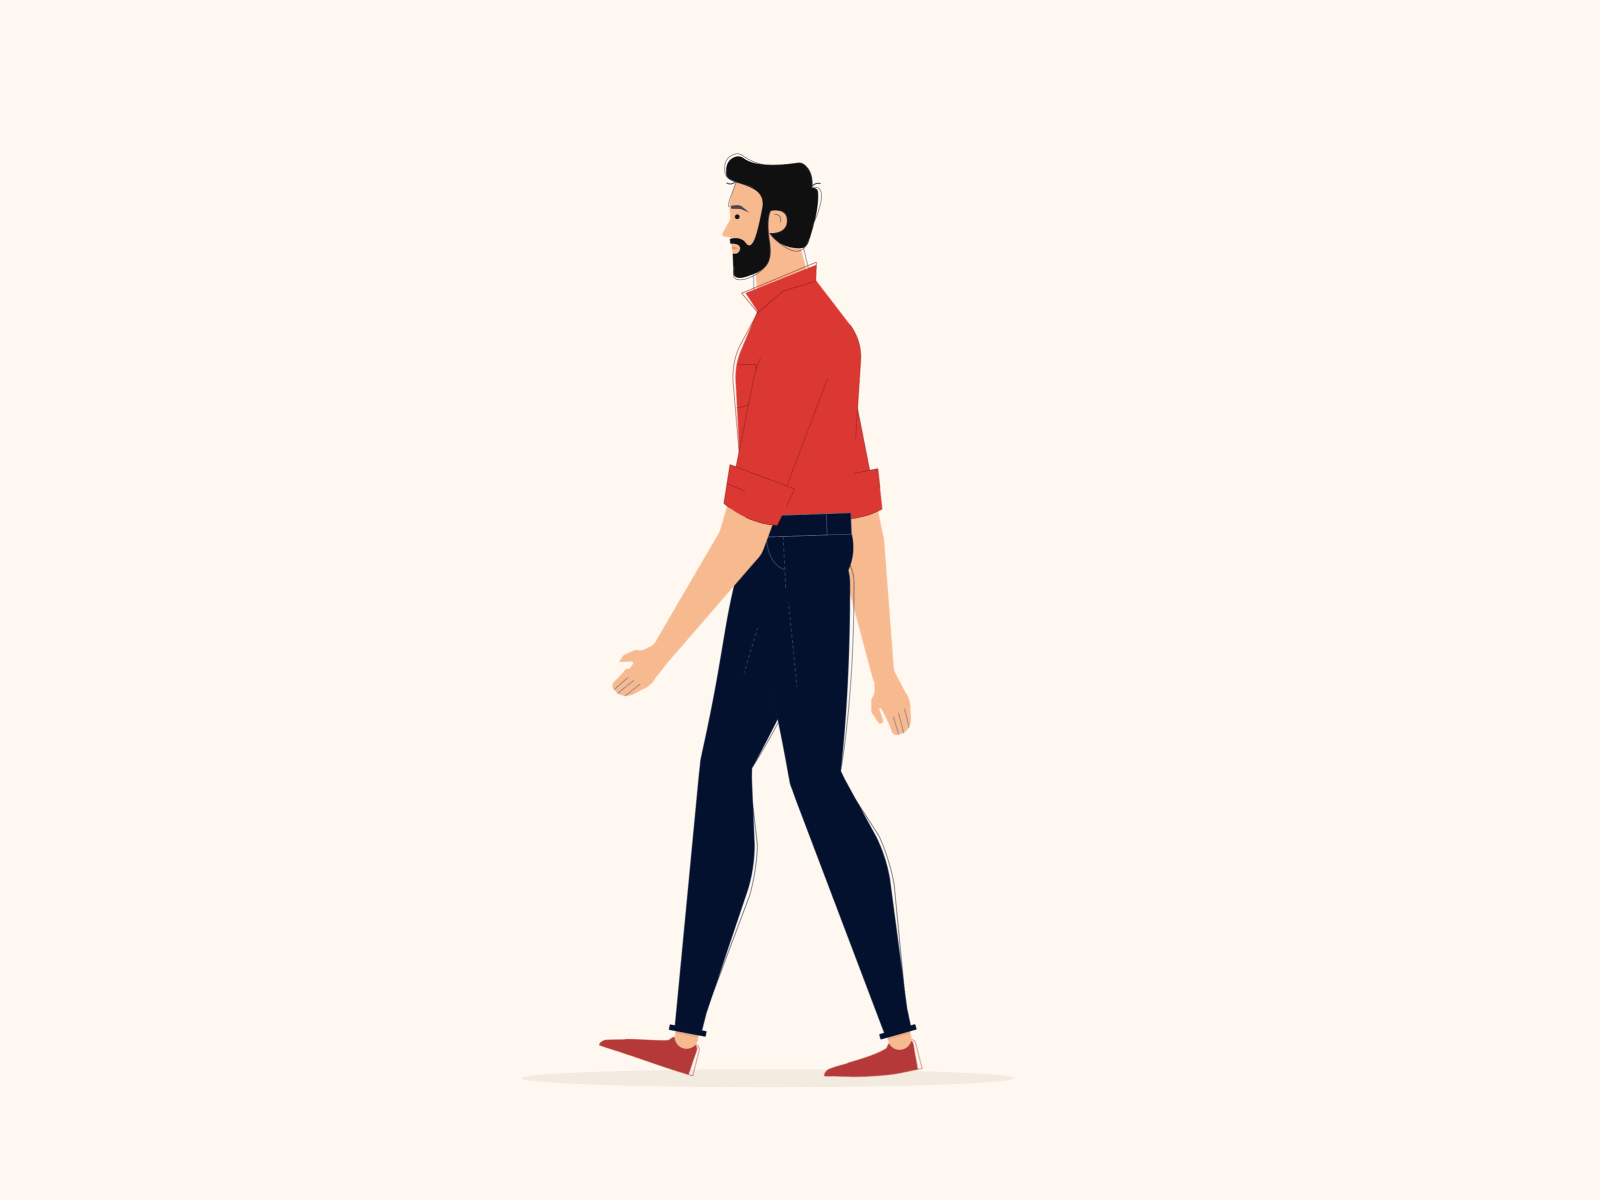 Walk cycle animation - Character animation After Effects - Gif by Mograph  Workflow on Dribbble